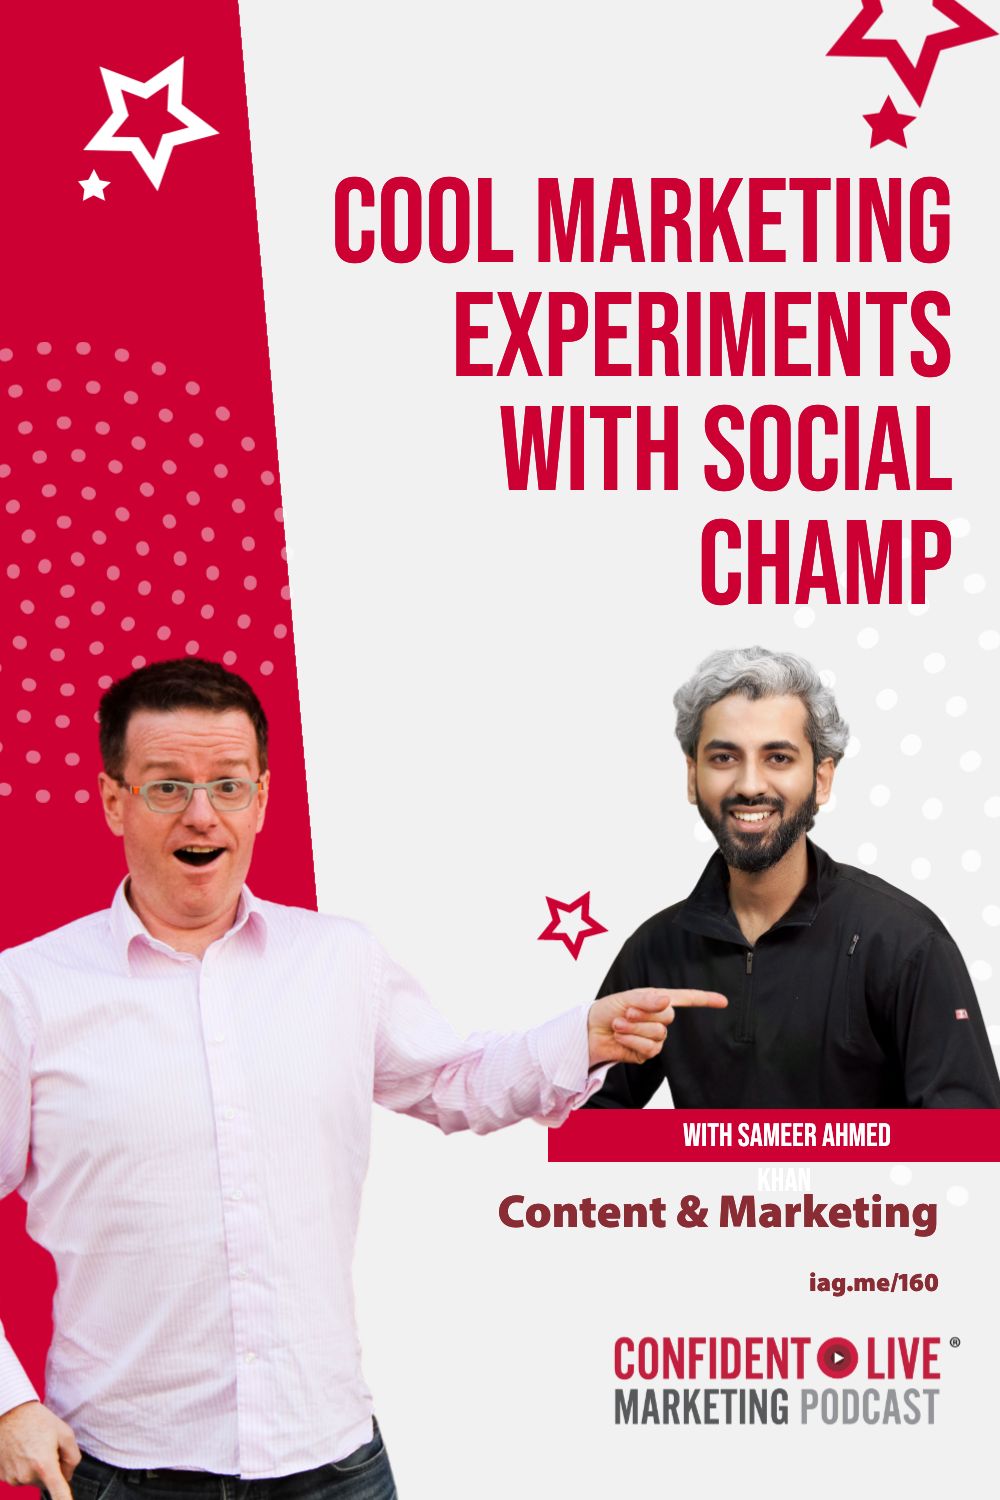 Cool Marketing Experiments with Social Champ